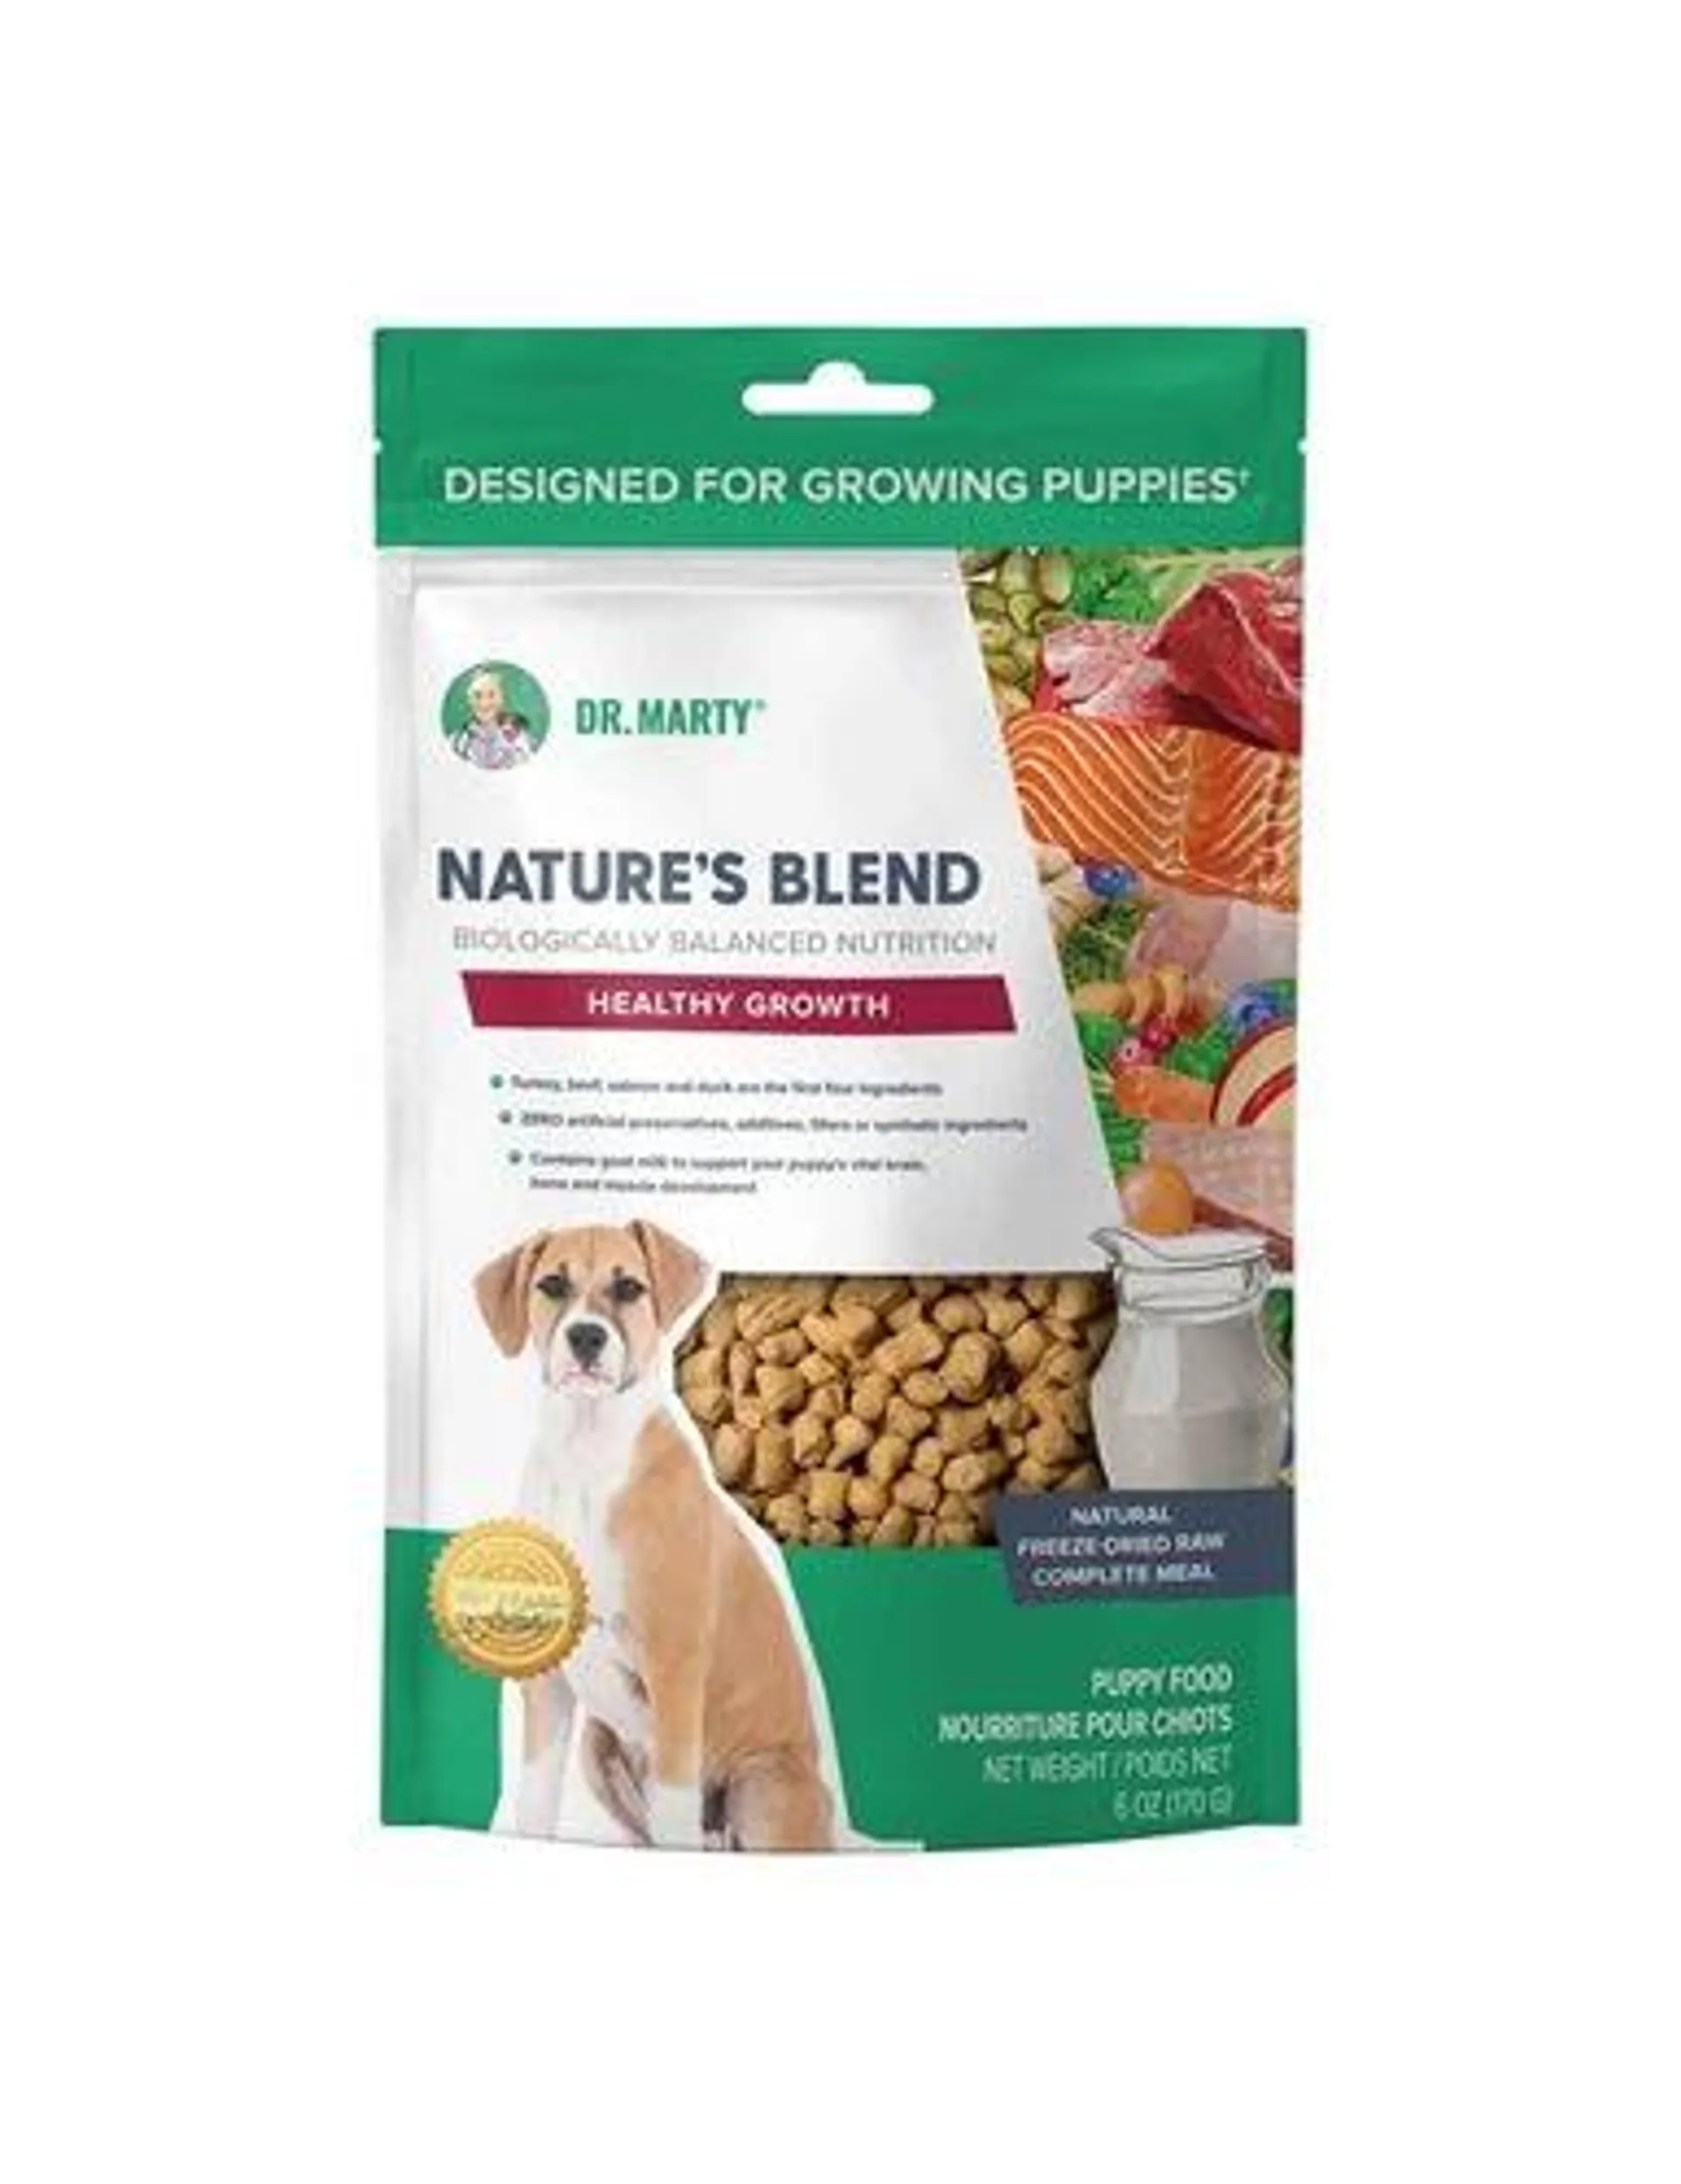 Dr. Marty Nature's Blend Premium Freeze-Dried Healthy Growth Puppy Food, 6 Ounces